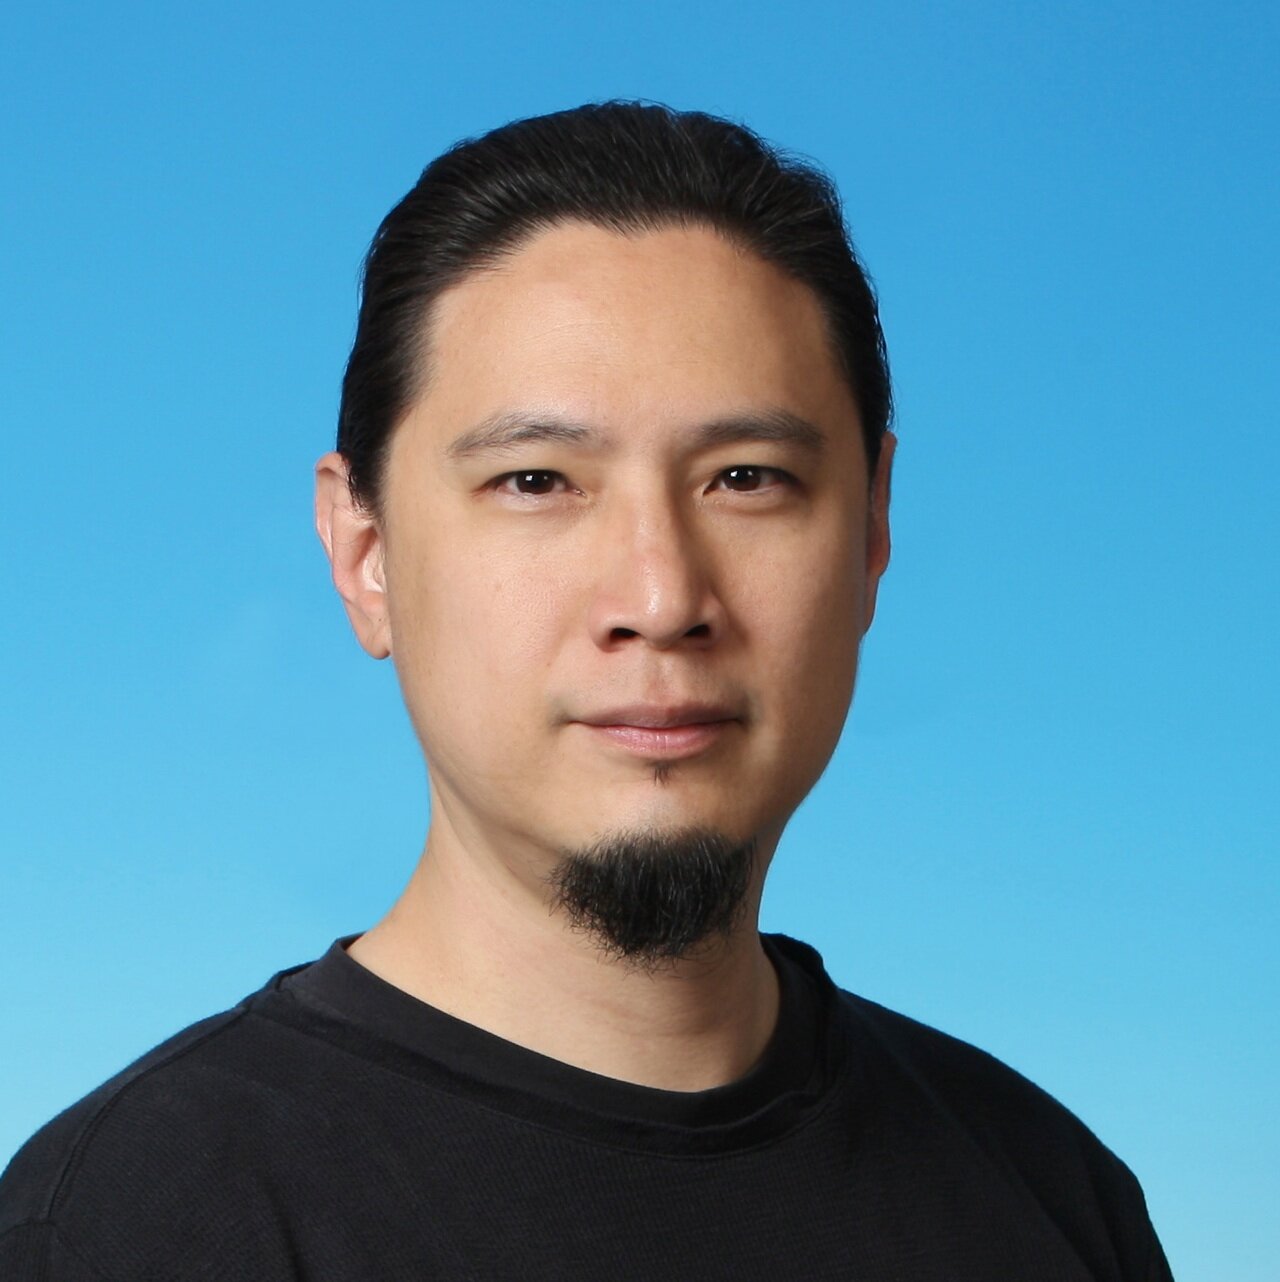 De Kai - Pioneer in machine learning and artificial intelligence